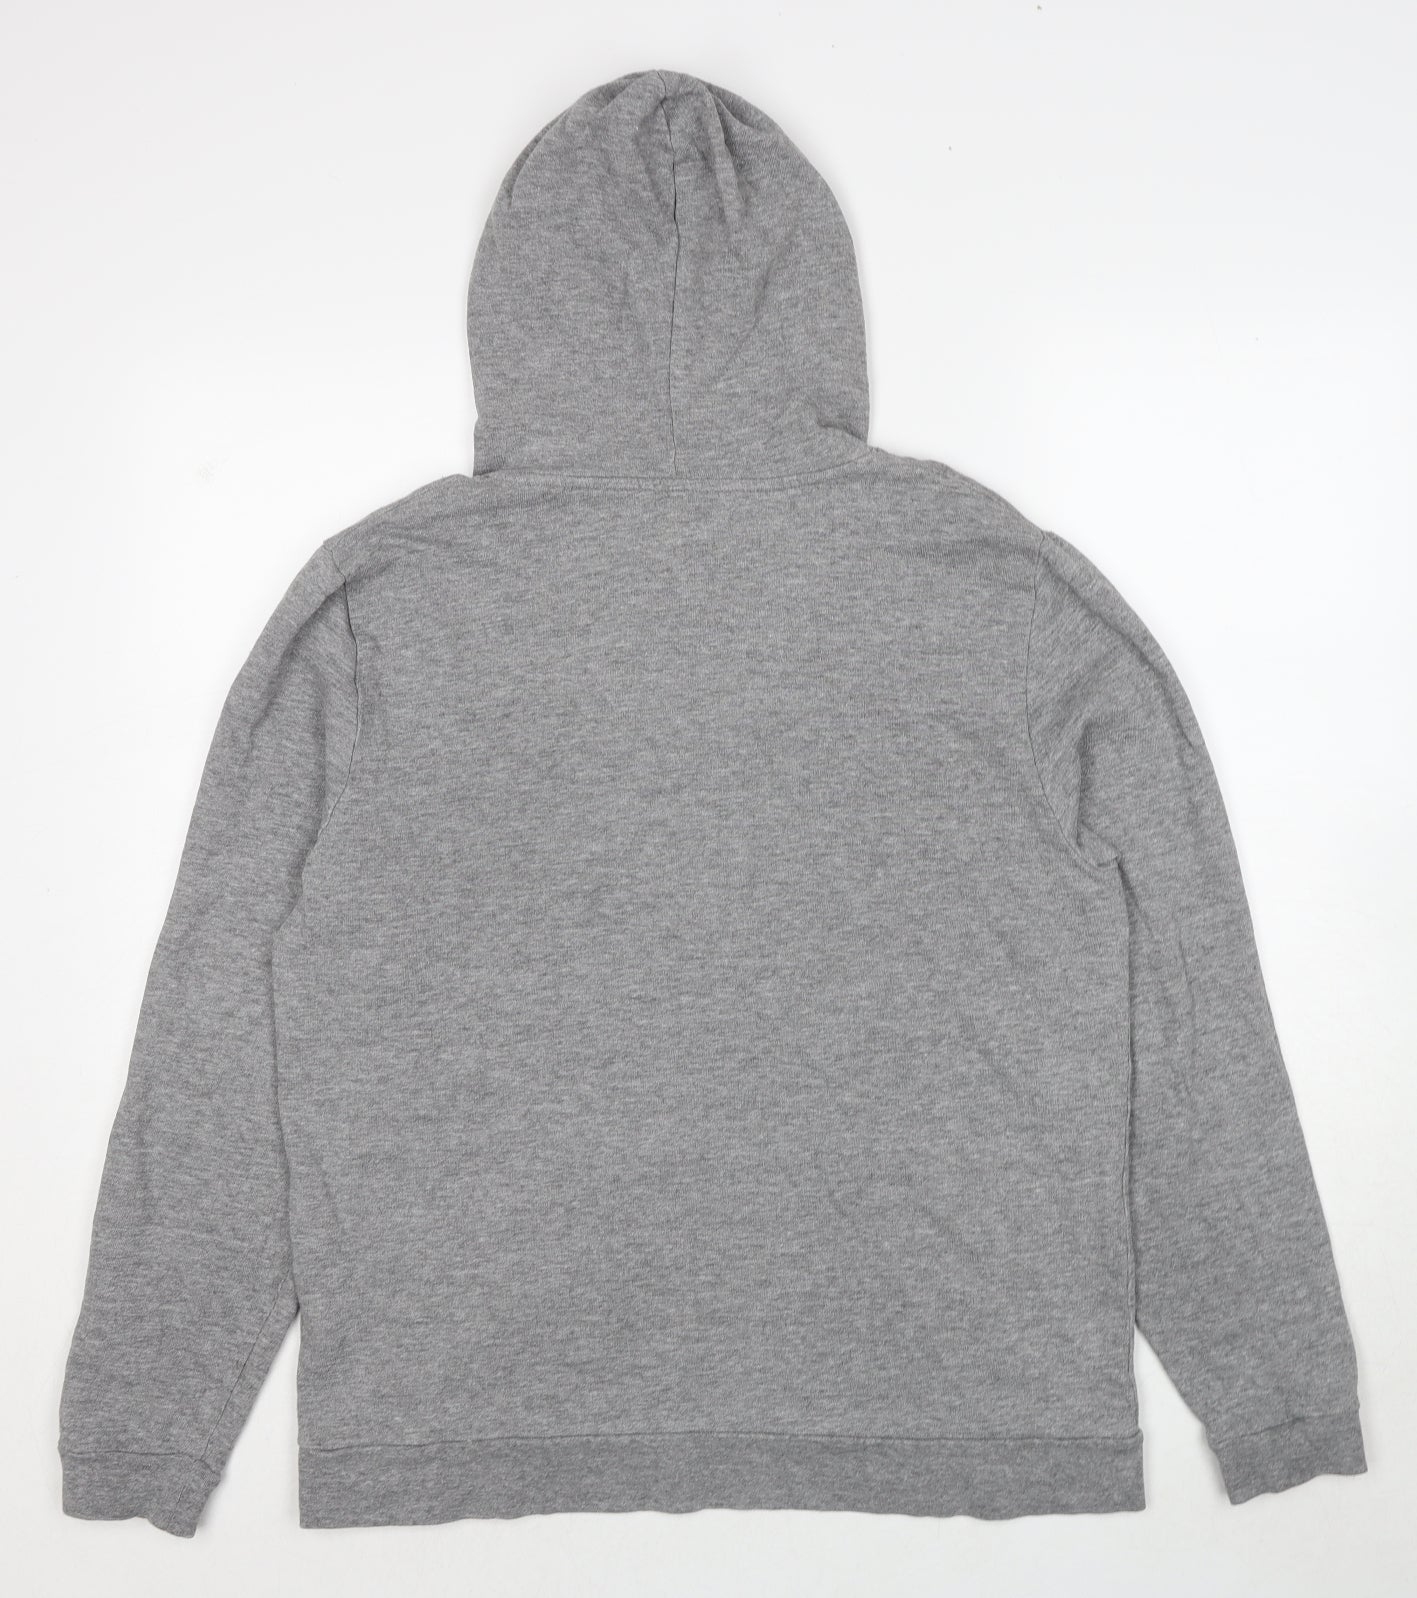 ASOS Womens Grey Cotton Pullover Hoodie Size L Pullover